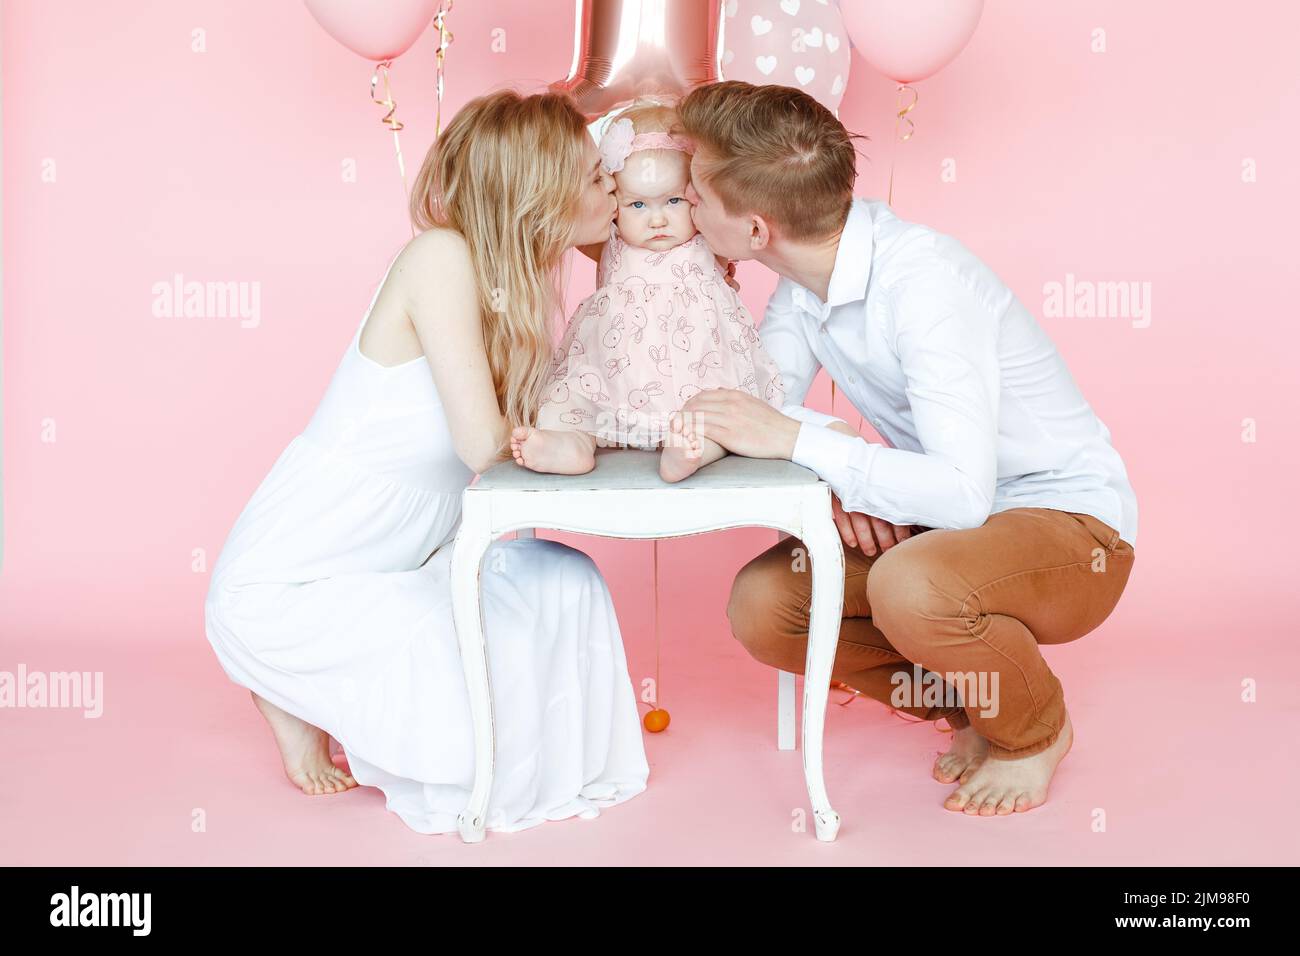 Calm, loving full family of man, woman kissing one year infant in pink dress sit on chair and celebrate birthday party Stock Photo